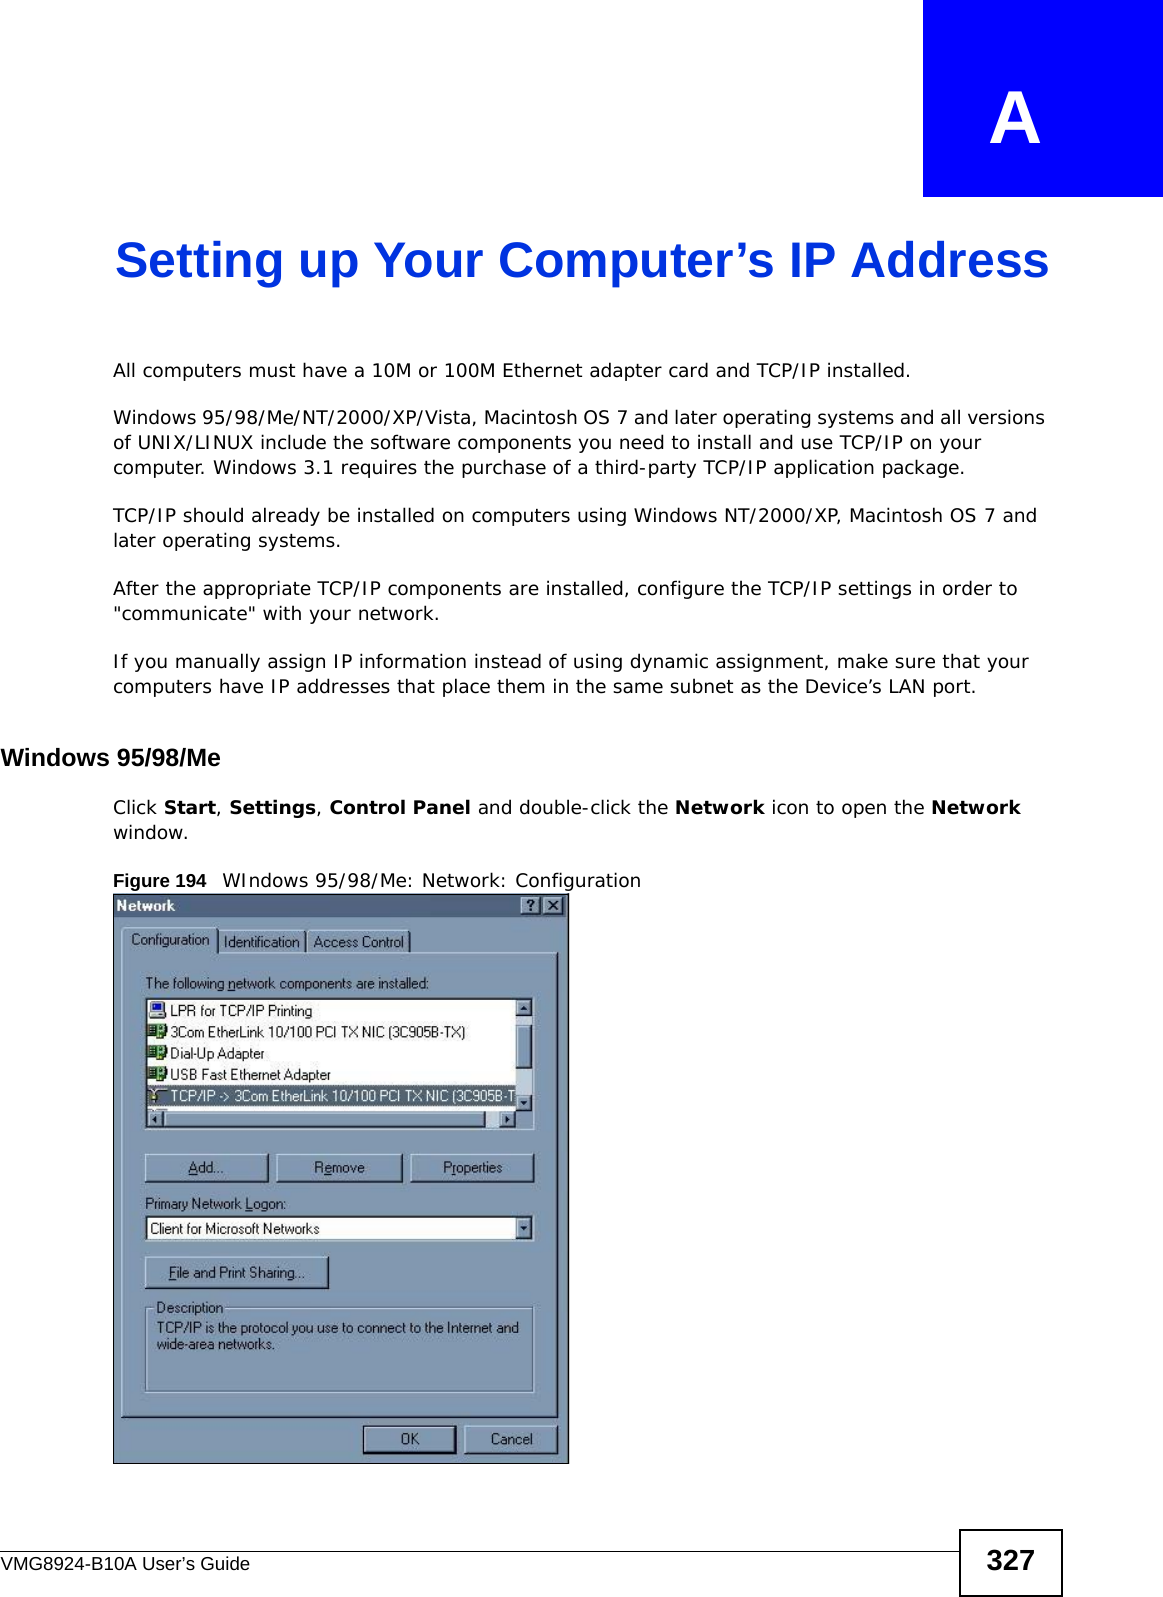 VMG8924-B10A User’s Guide 327APPENDIX   ASetting up Your Computer’s IP AddressAll computers must have a 10M or 100M Ethernet adapter card and TCP/IP installed. Windows 95/98/Me/NT/2000/XP/Vista, Macintosh OS 7 and later operating systems and all versions of UNIX/LINUX include the software components you need to install and use TCP/IP on your computer. Windows 3.1 requires the purchase of a third-party TCP/IP application package.TCP/IP should already be installed on computers using Windows NT/2000/XP, Macintosh OS 7 and later operating systems.After the appropriate TCP/IP components are installed, configure the TCP/IP settings in order to &quot;communicate&quot; with your network. If you manually assign IP information instead of using dynamic assignment, make sure that your computers have IP addresses that place them in the same subnet as the Device’s LAN port.Windows 95/98/MeClick Start, Settings, Control Panel and double-click the Network icon to open the Network window.Figure 194   WIndows 95/98/Me: Network: Configuration